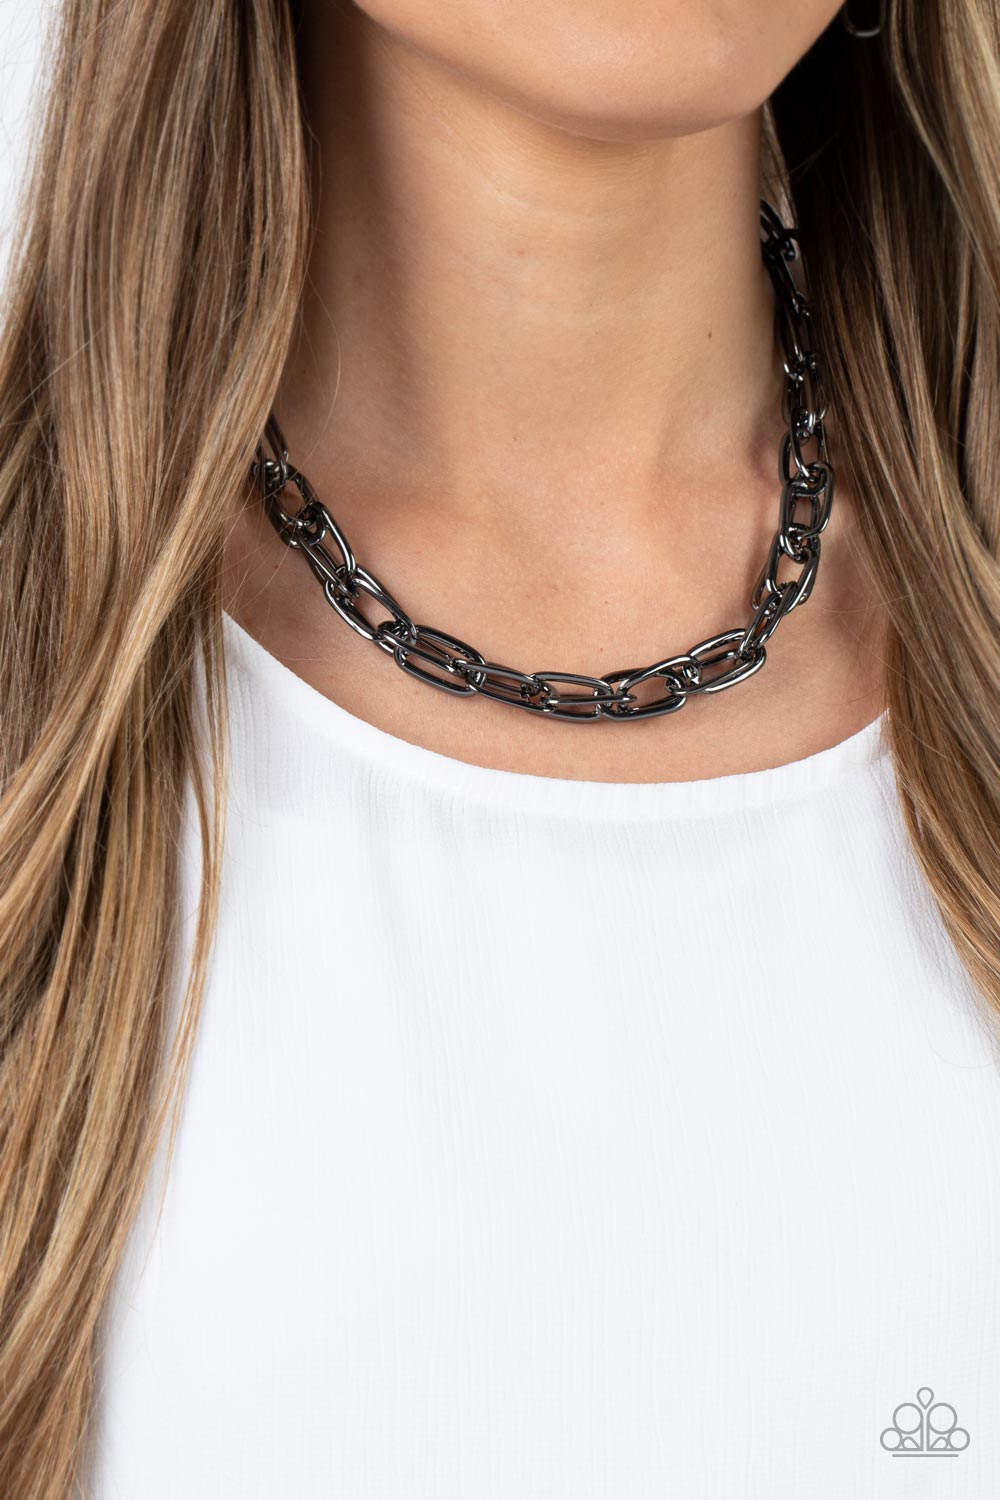 Tough Call Gunmetal Black Chain Necklace - Paparazzi Accessories-on model - CarasShop.com - $5 Jewelry by Cara Jewels